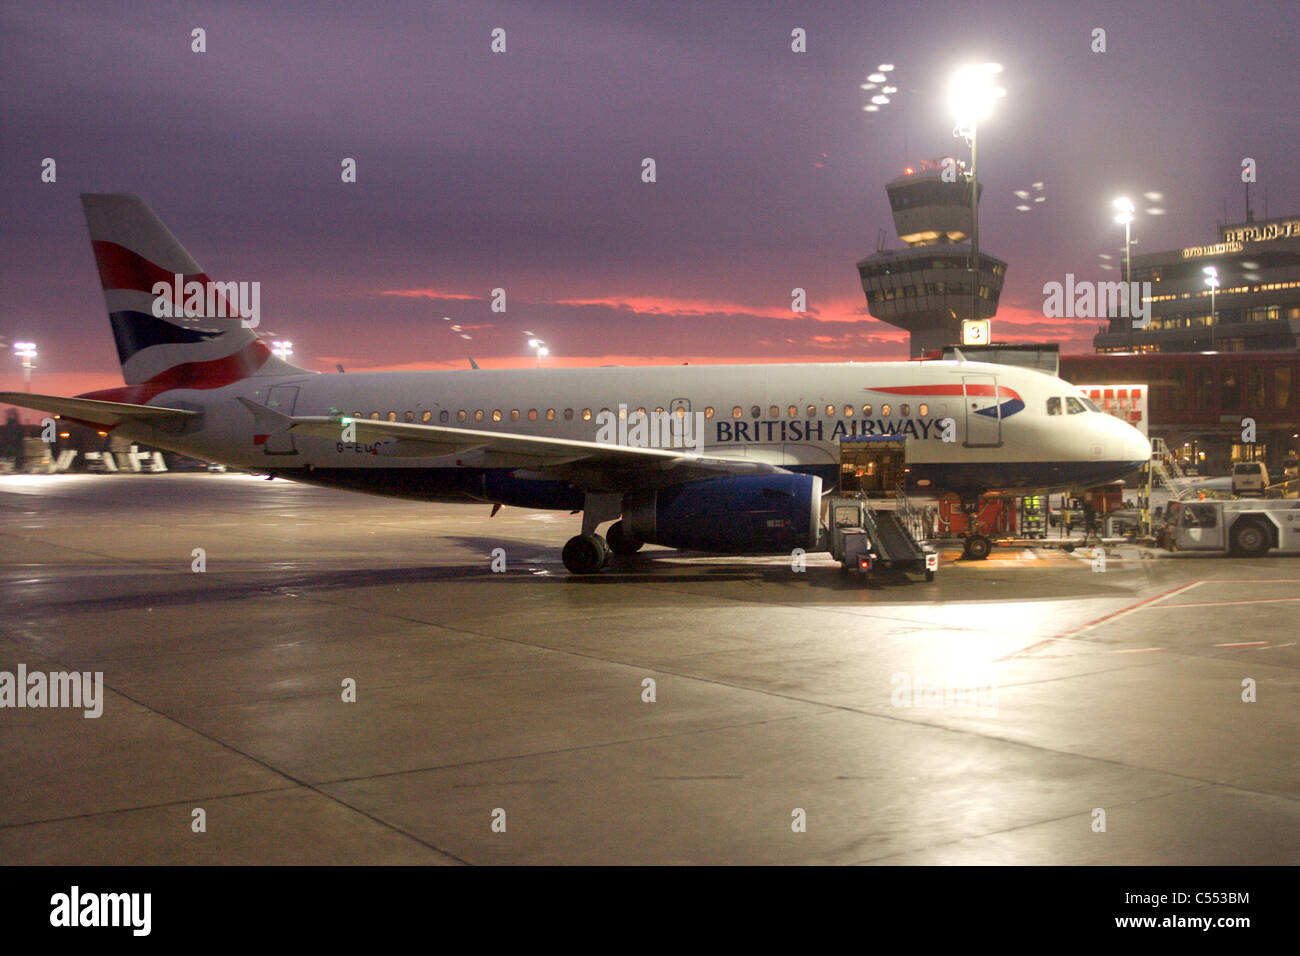 A British Airways plane at the Tegel airport, Berlin, Germany Stock Photo